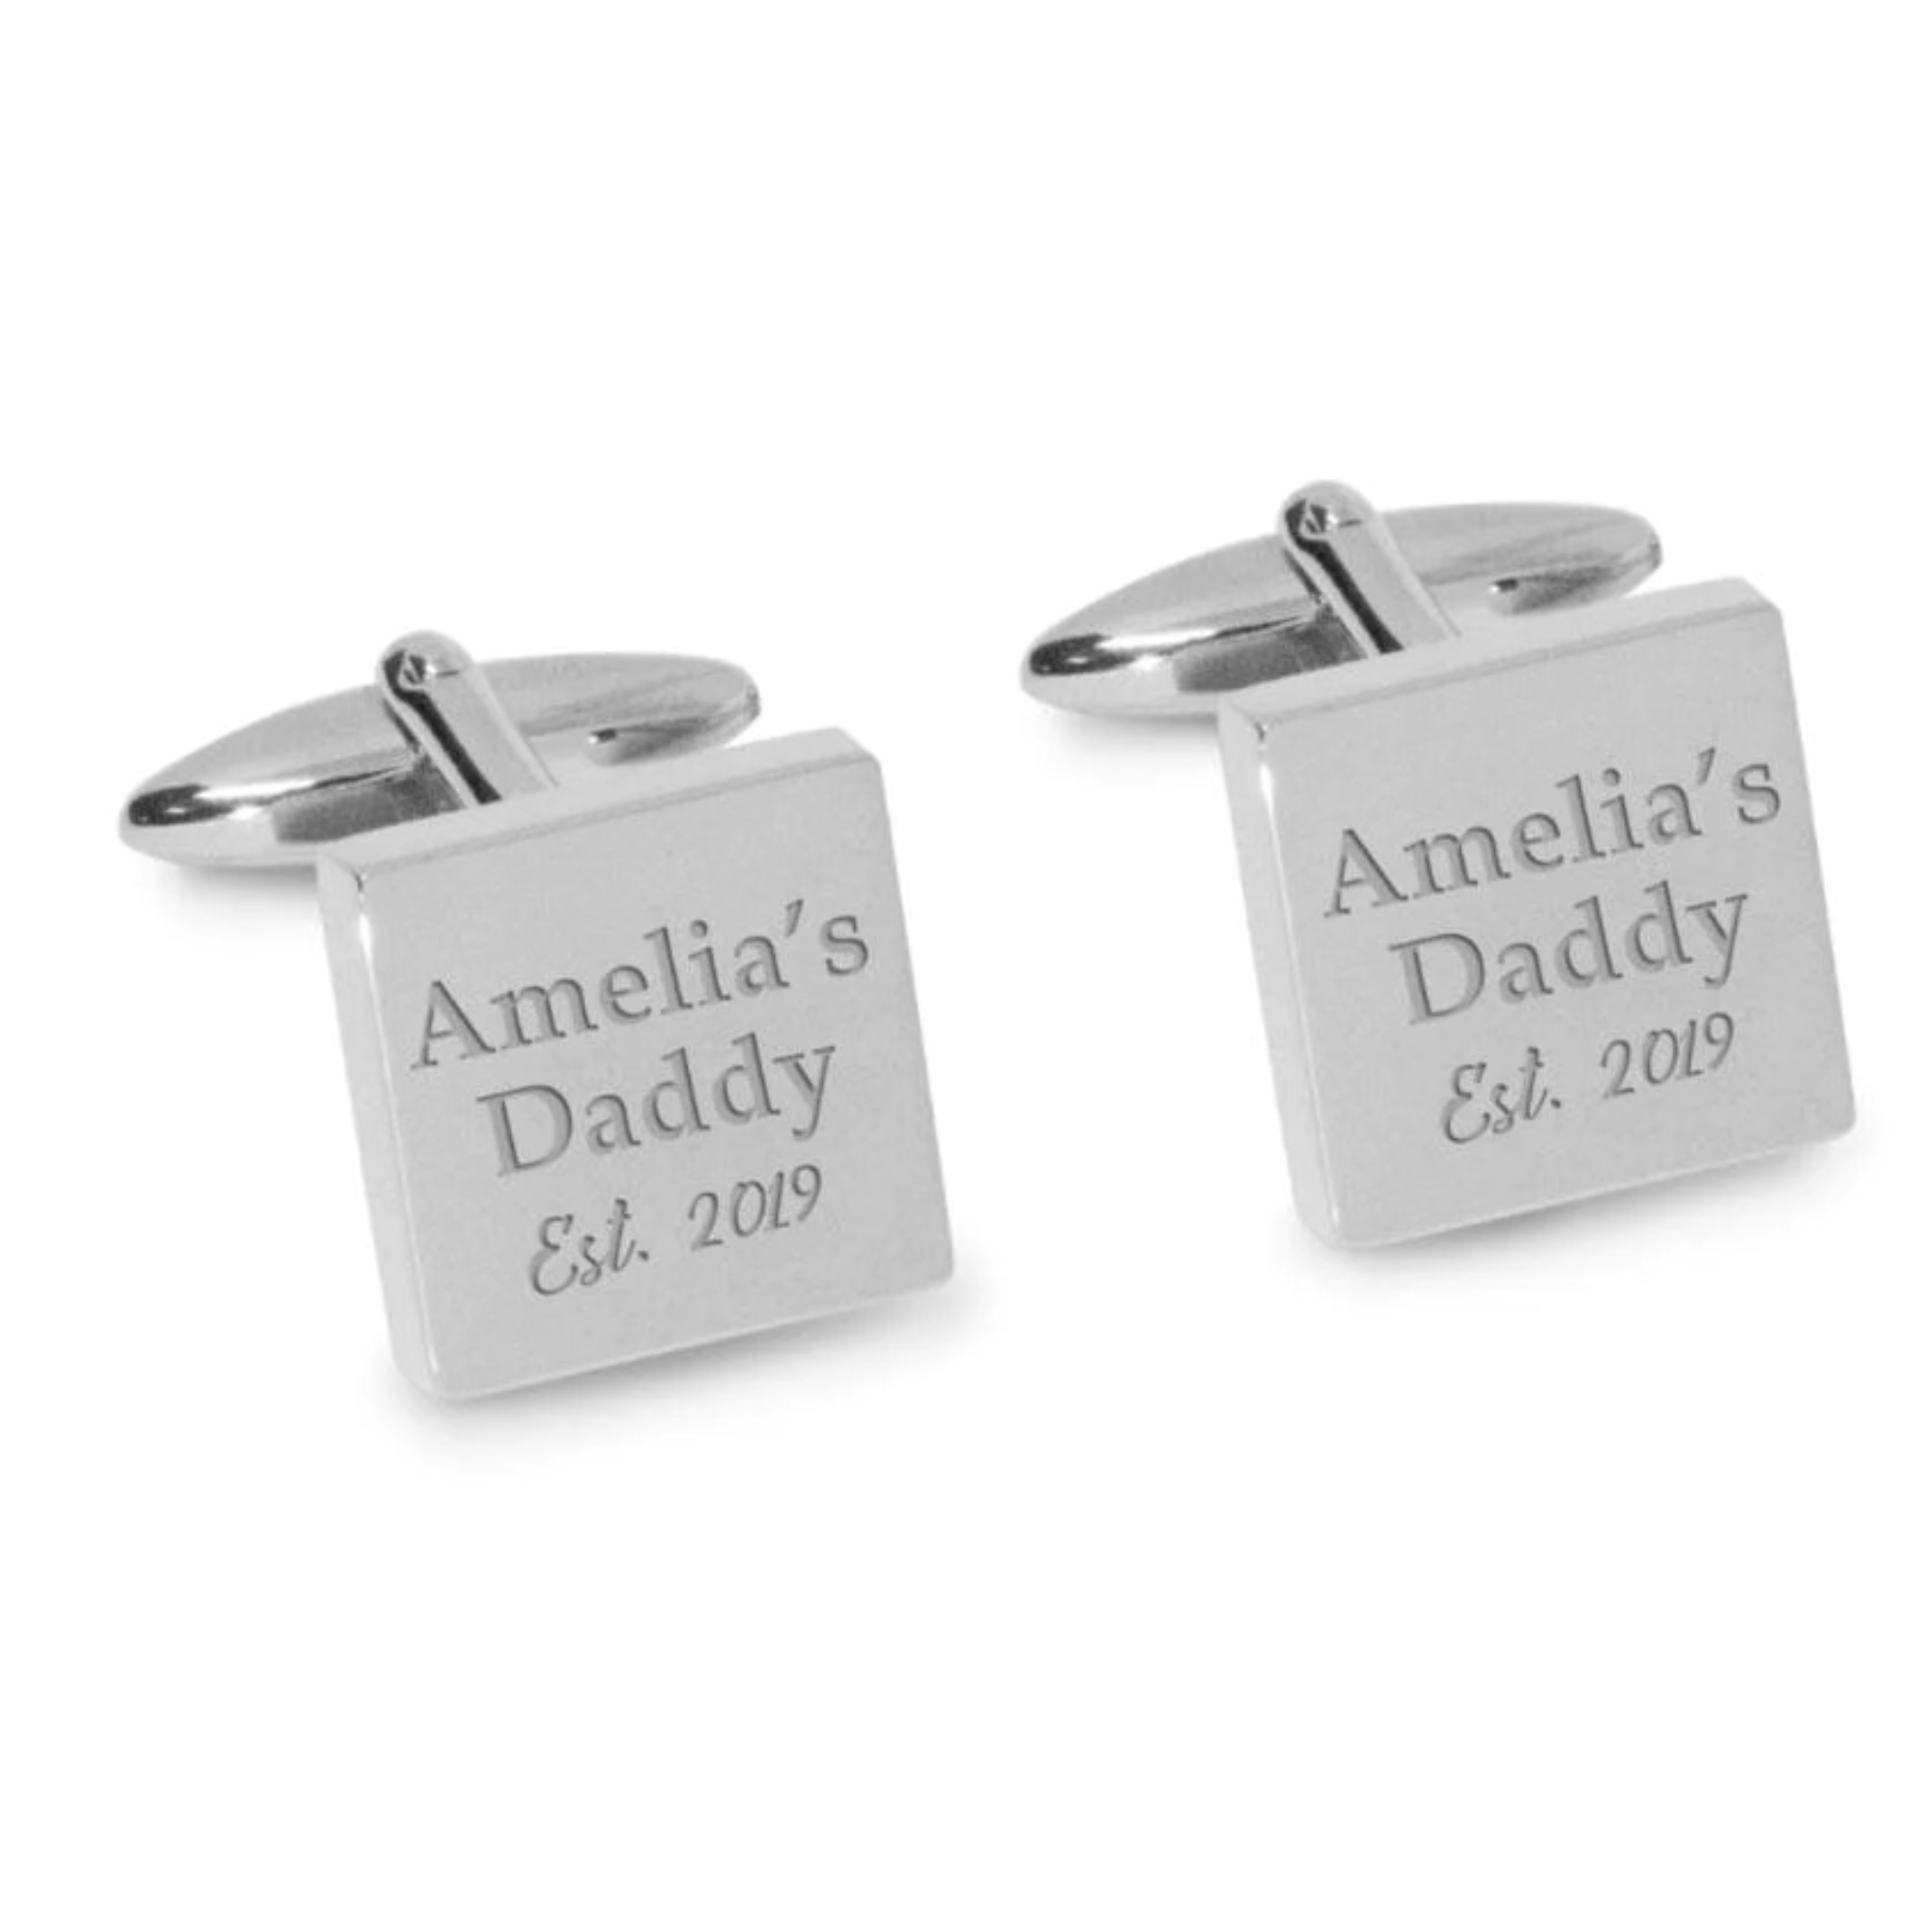 Name Daddy Year Engraved Cufflinks in Silver